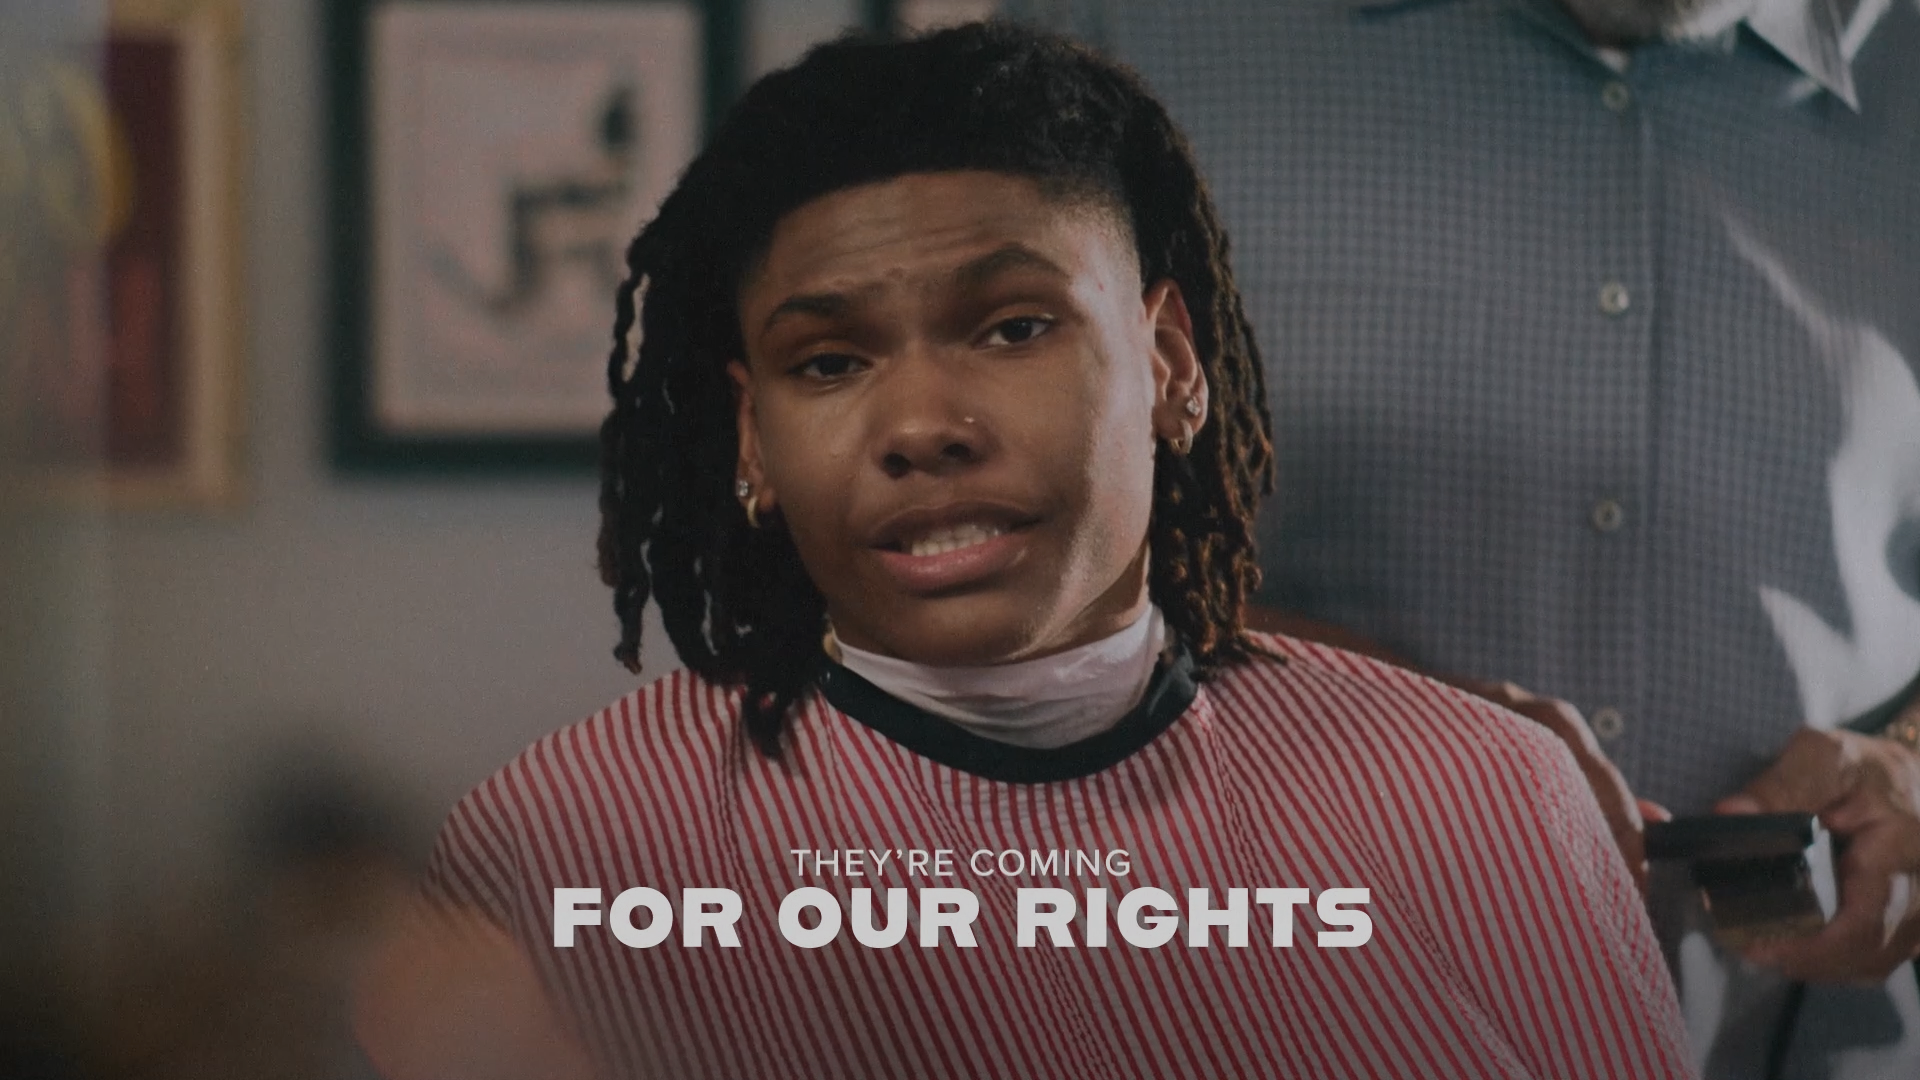 Thumbnail of an ad called "Breaking Through." Image shows a young Black man sitting in a barber's chair looking at camera. Closed caption reads "They're coming for our rights"